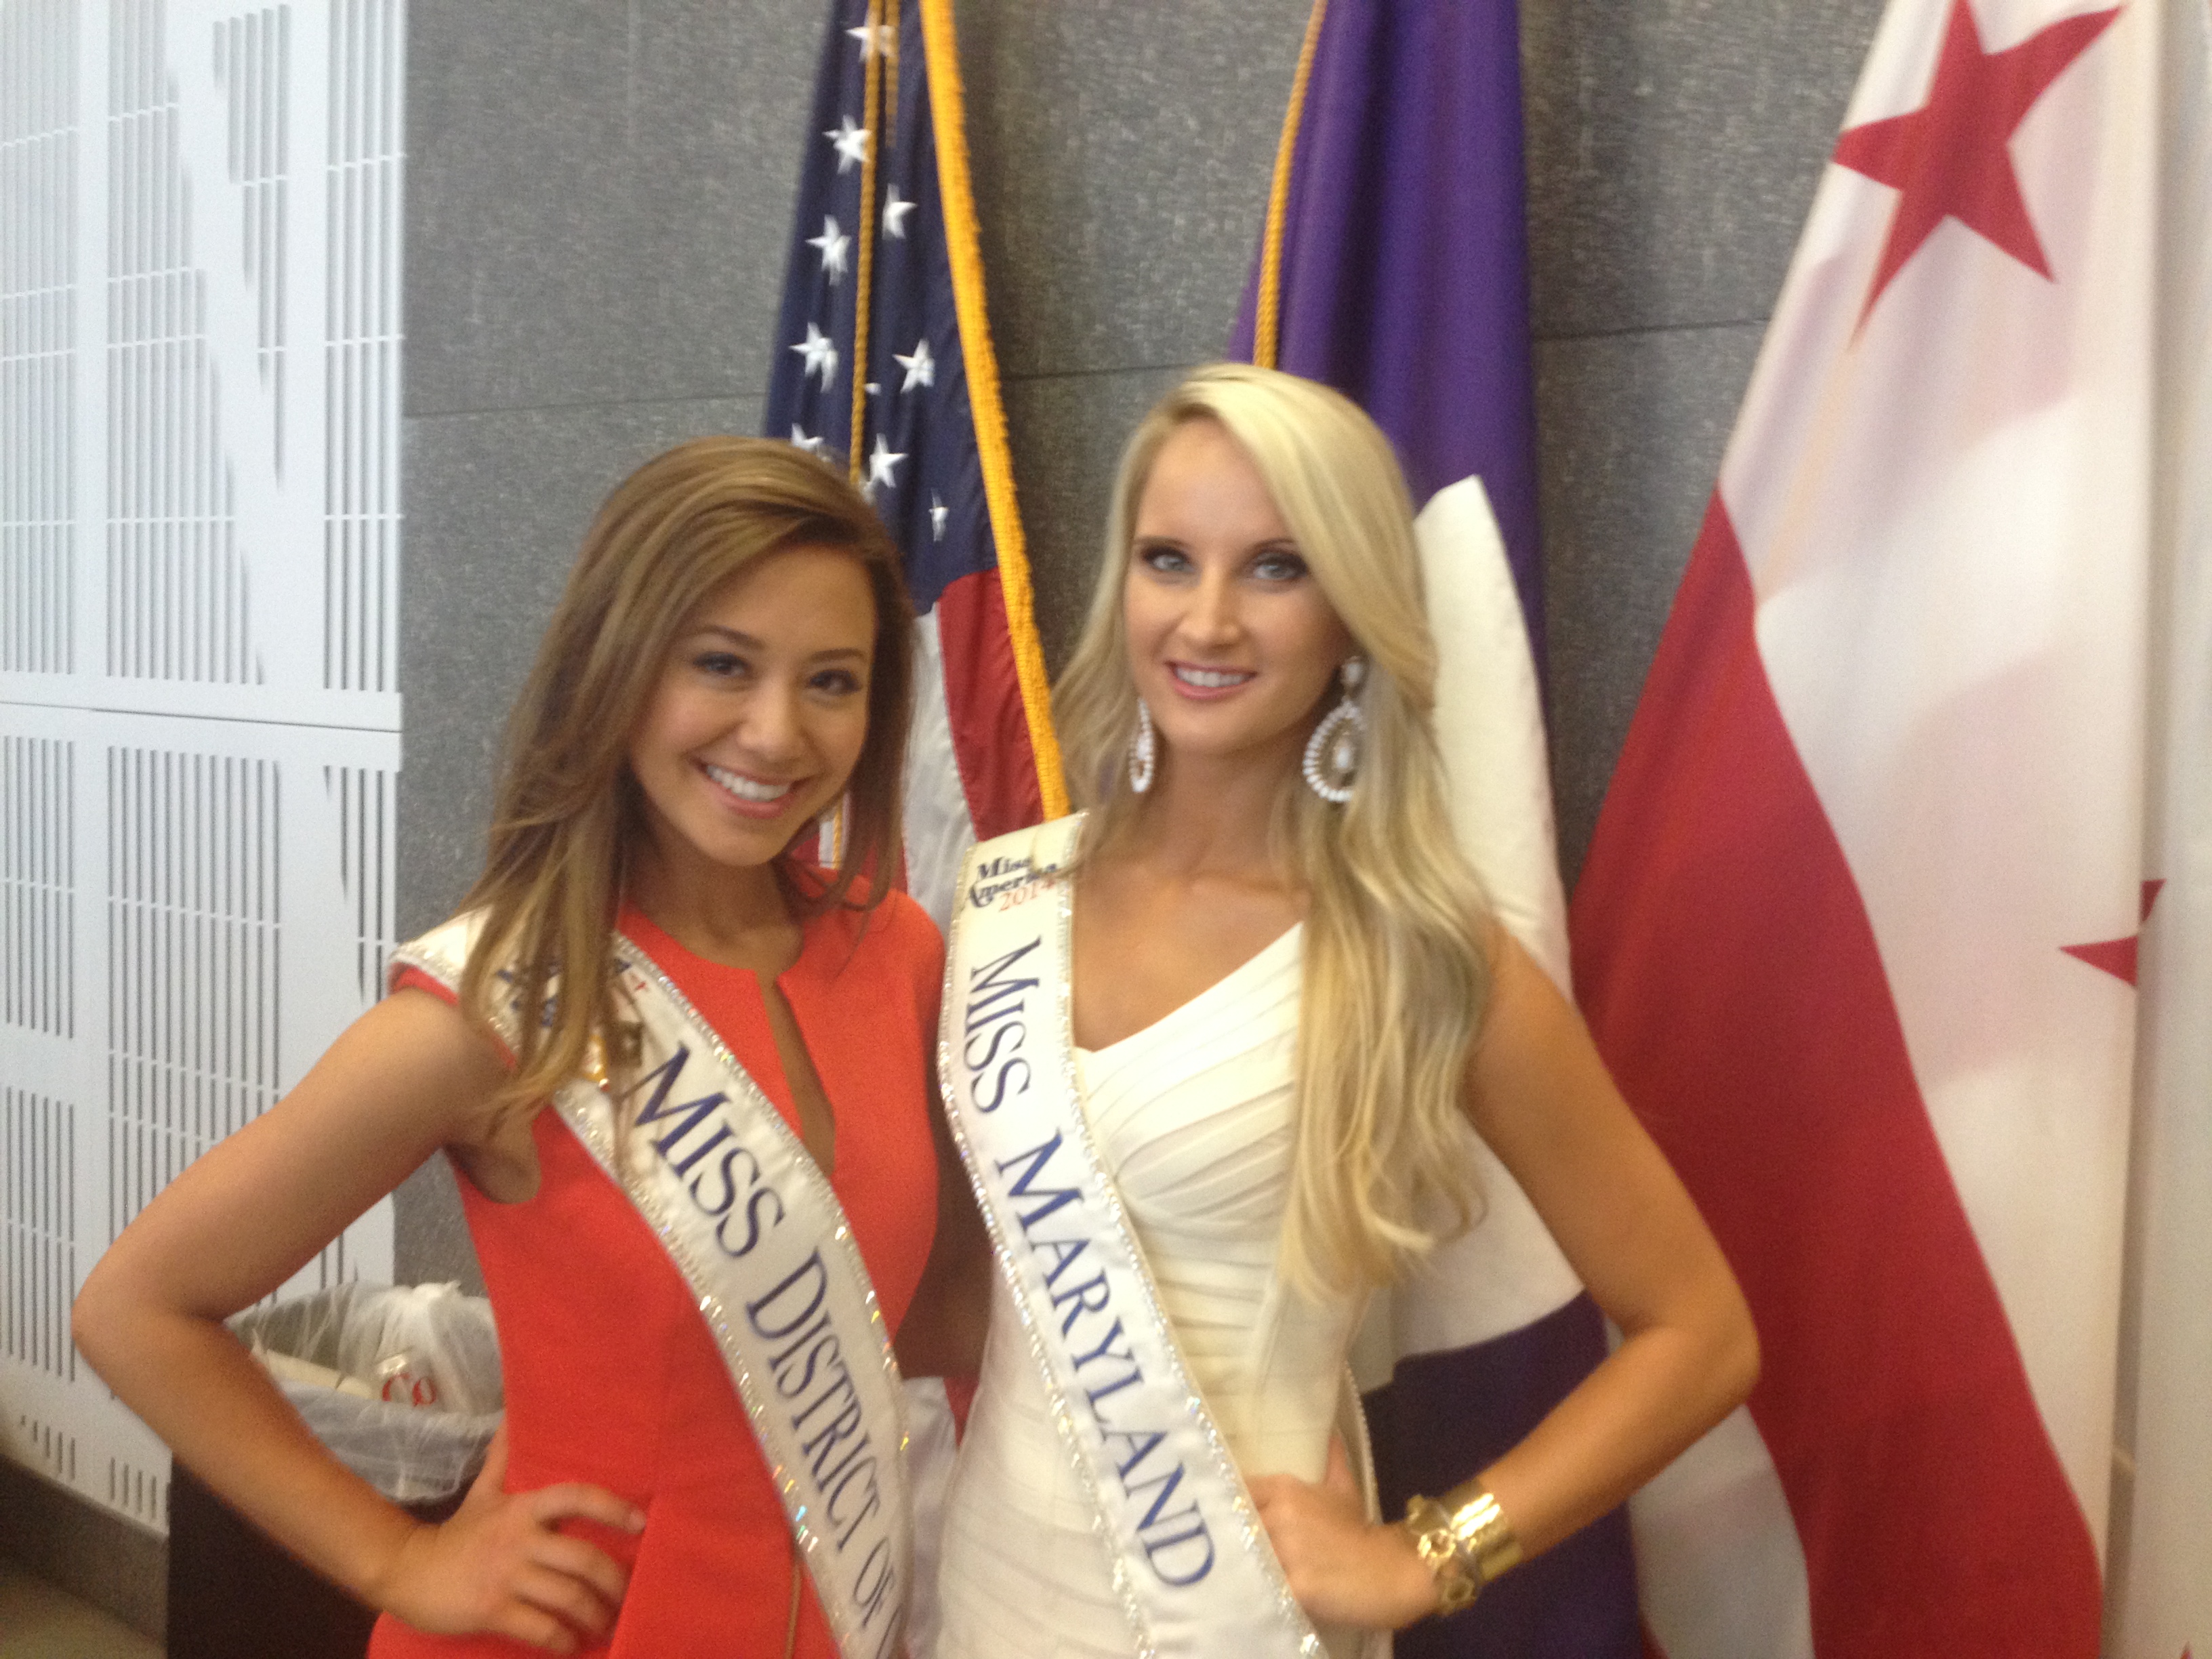 Miss America and 53 Contestants “Campaign” on Capital Hill